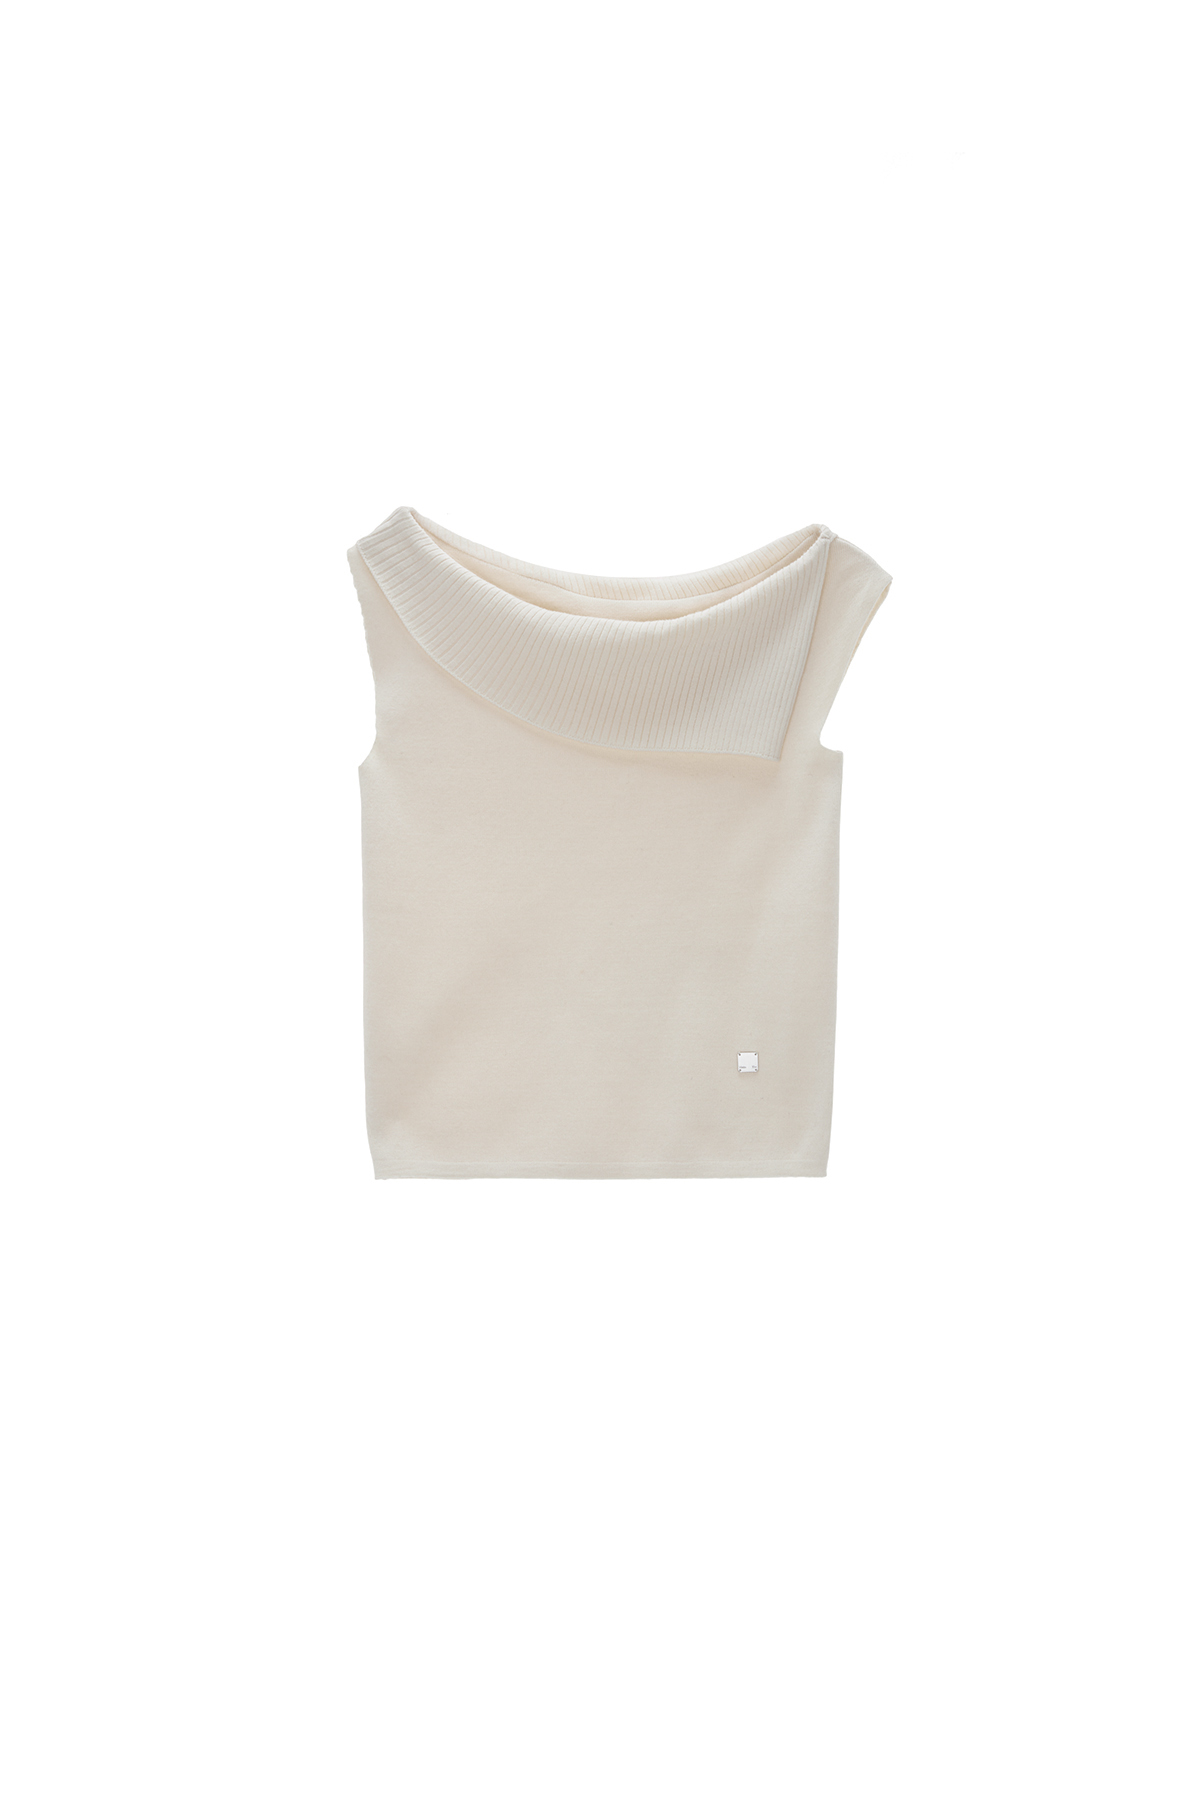 ONE SHOULDER SLEEVELESS KNIT TOP IN IVORY